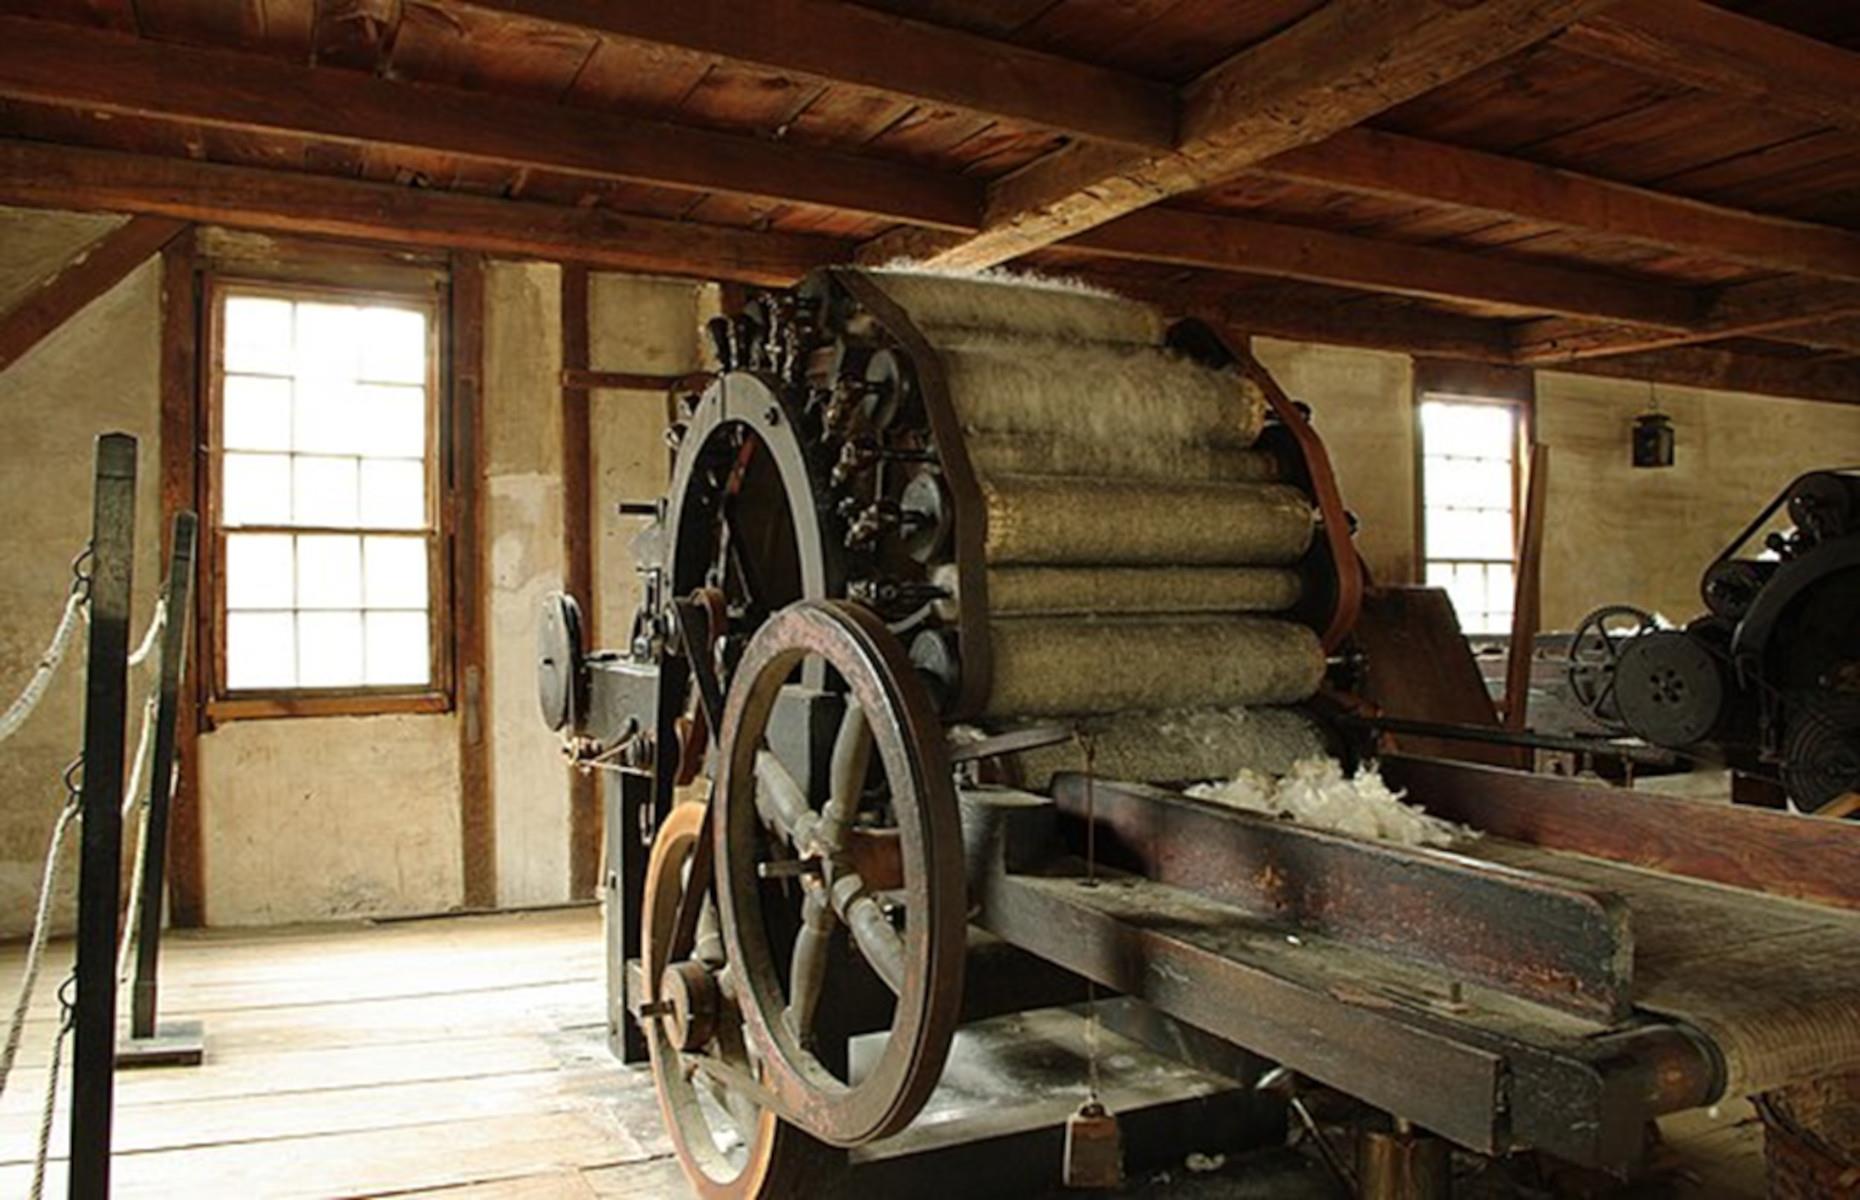 <p>The final sector, the ‘Mill Neighborhood’, features three different, fully operational, water-powered mills: a gristmill, a sawmill, and a carding mill. Of the three mills, the carding mill is the only original structure, with both the building and its machinery dating back to 1840. The three mills are reliant upon the millpond for their energy source, which can be crossed by means of a traditional New England covered bridge imported from Vermont.</p>